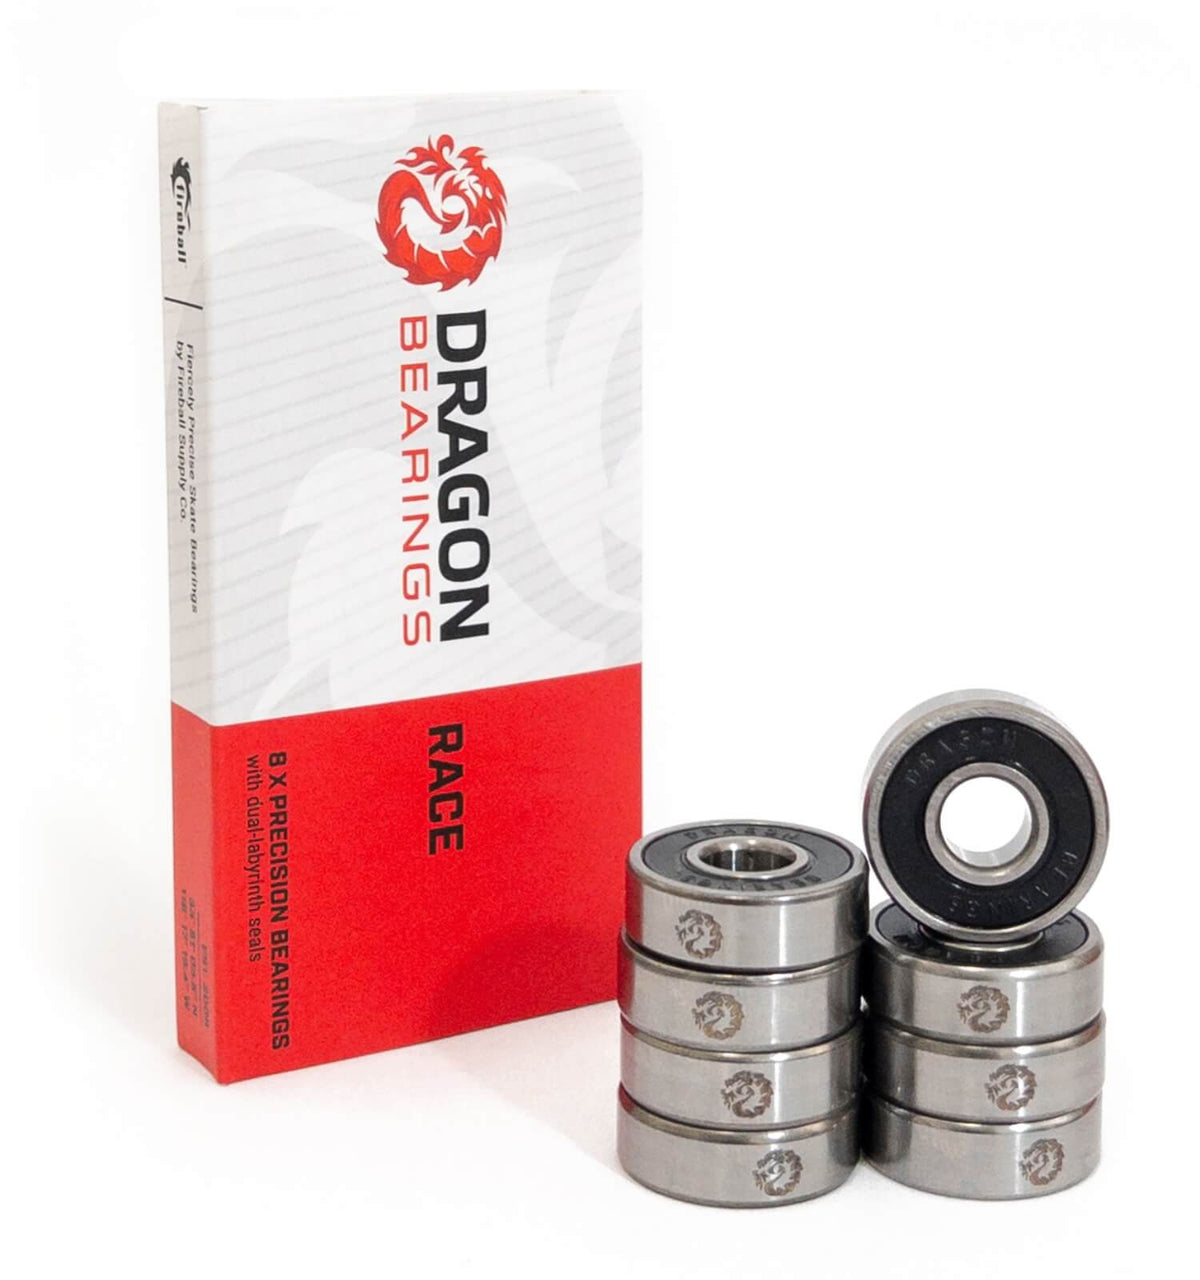 Dragon Bearings for Longboards and Skateboards